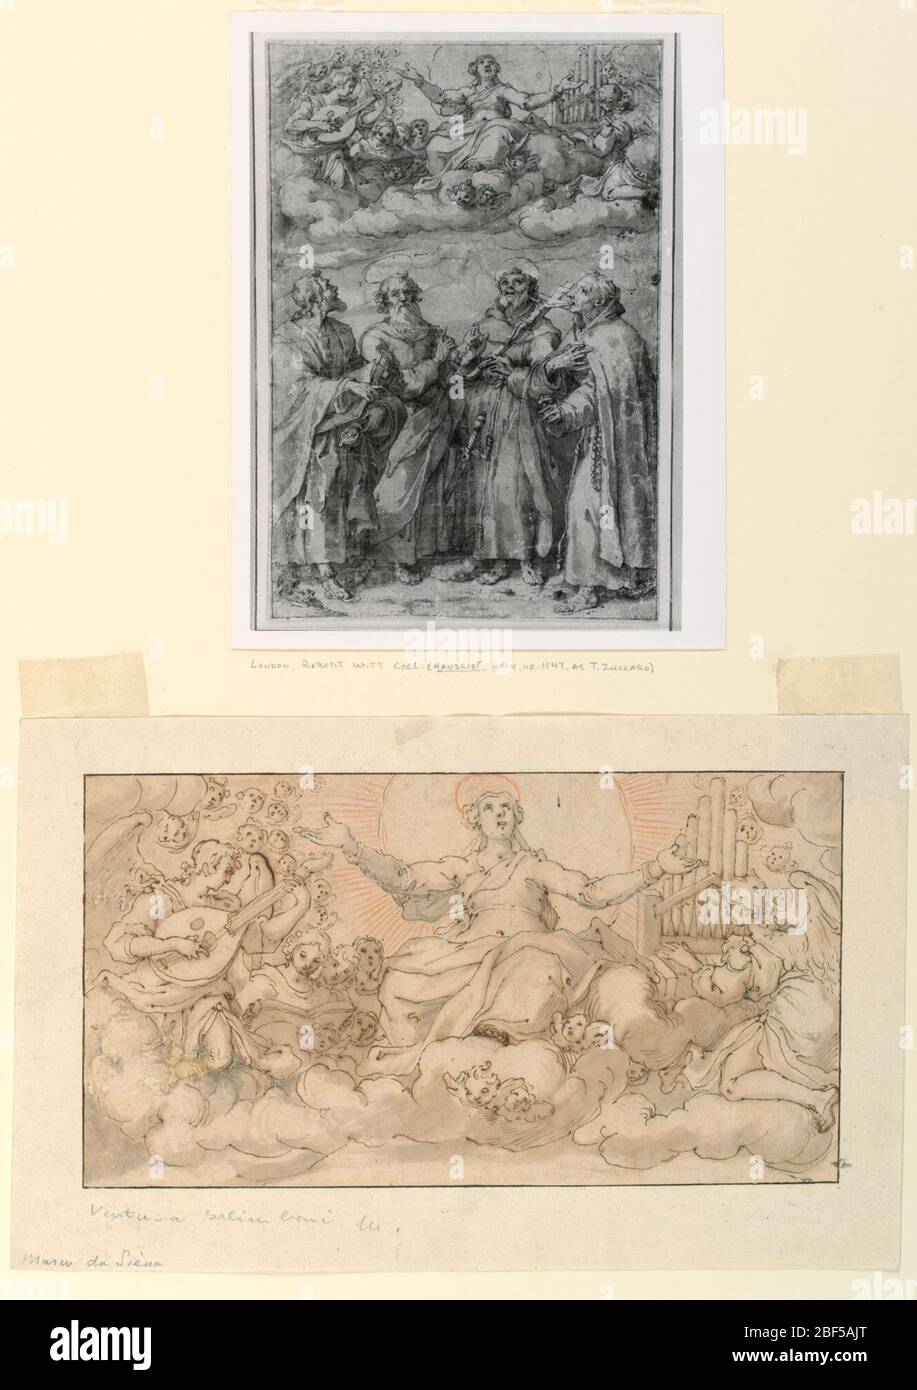 The Assumption of the Virgin. Horizontal rectangle. Upon Clouds. In the center is the Virgin, in a glory of rays. At left is an angel playing the lute. At right another one playing the organ; both with groups of angels. Cherubim below. Stock Photo